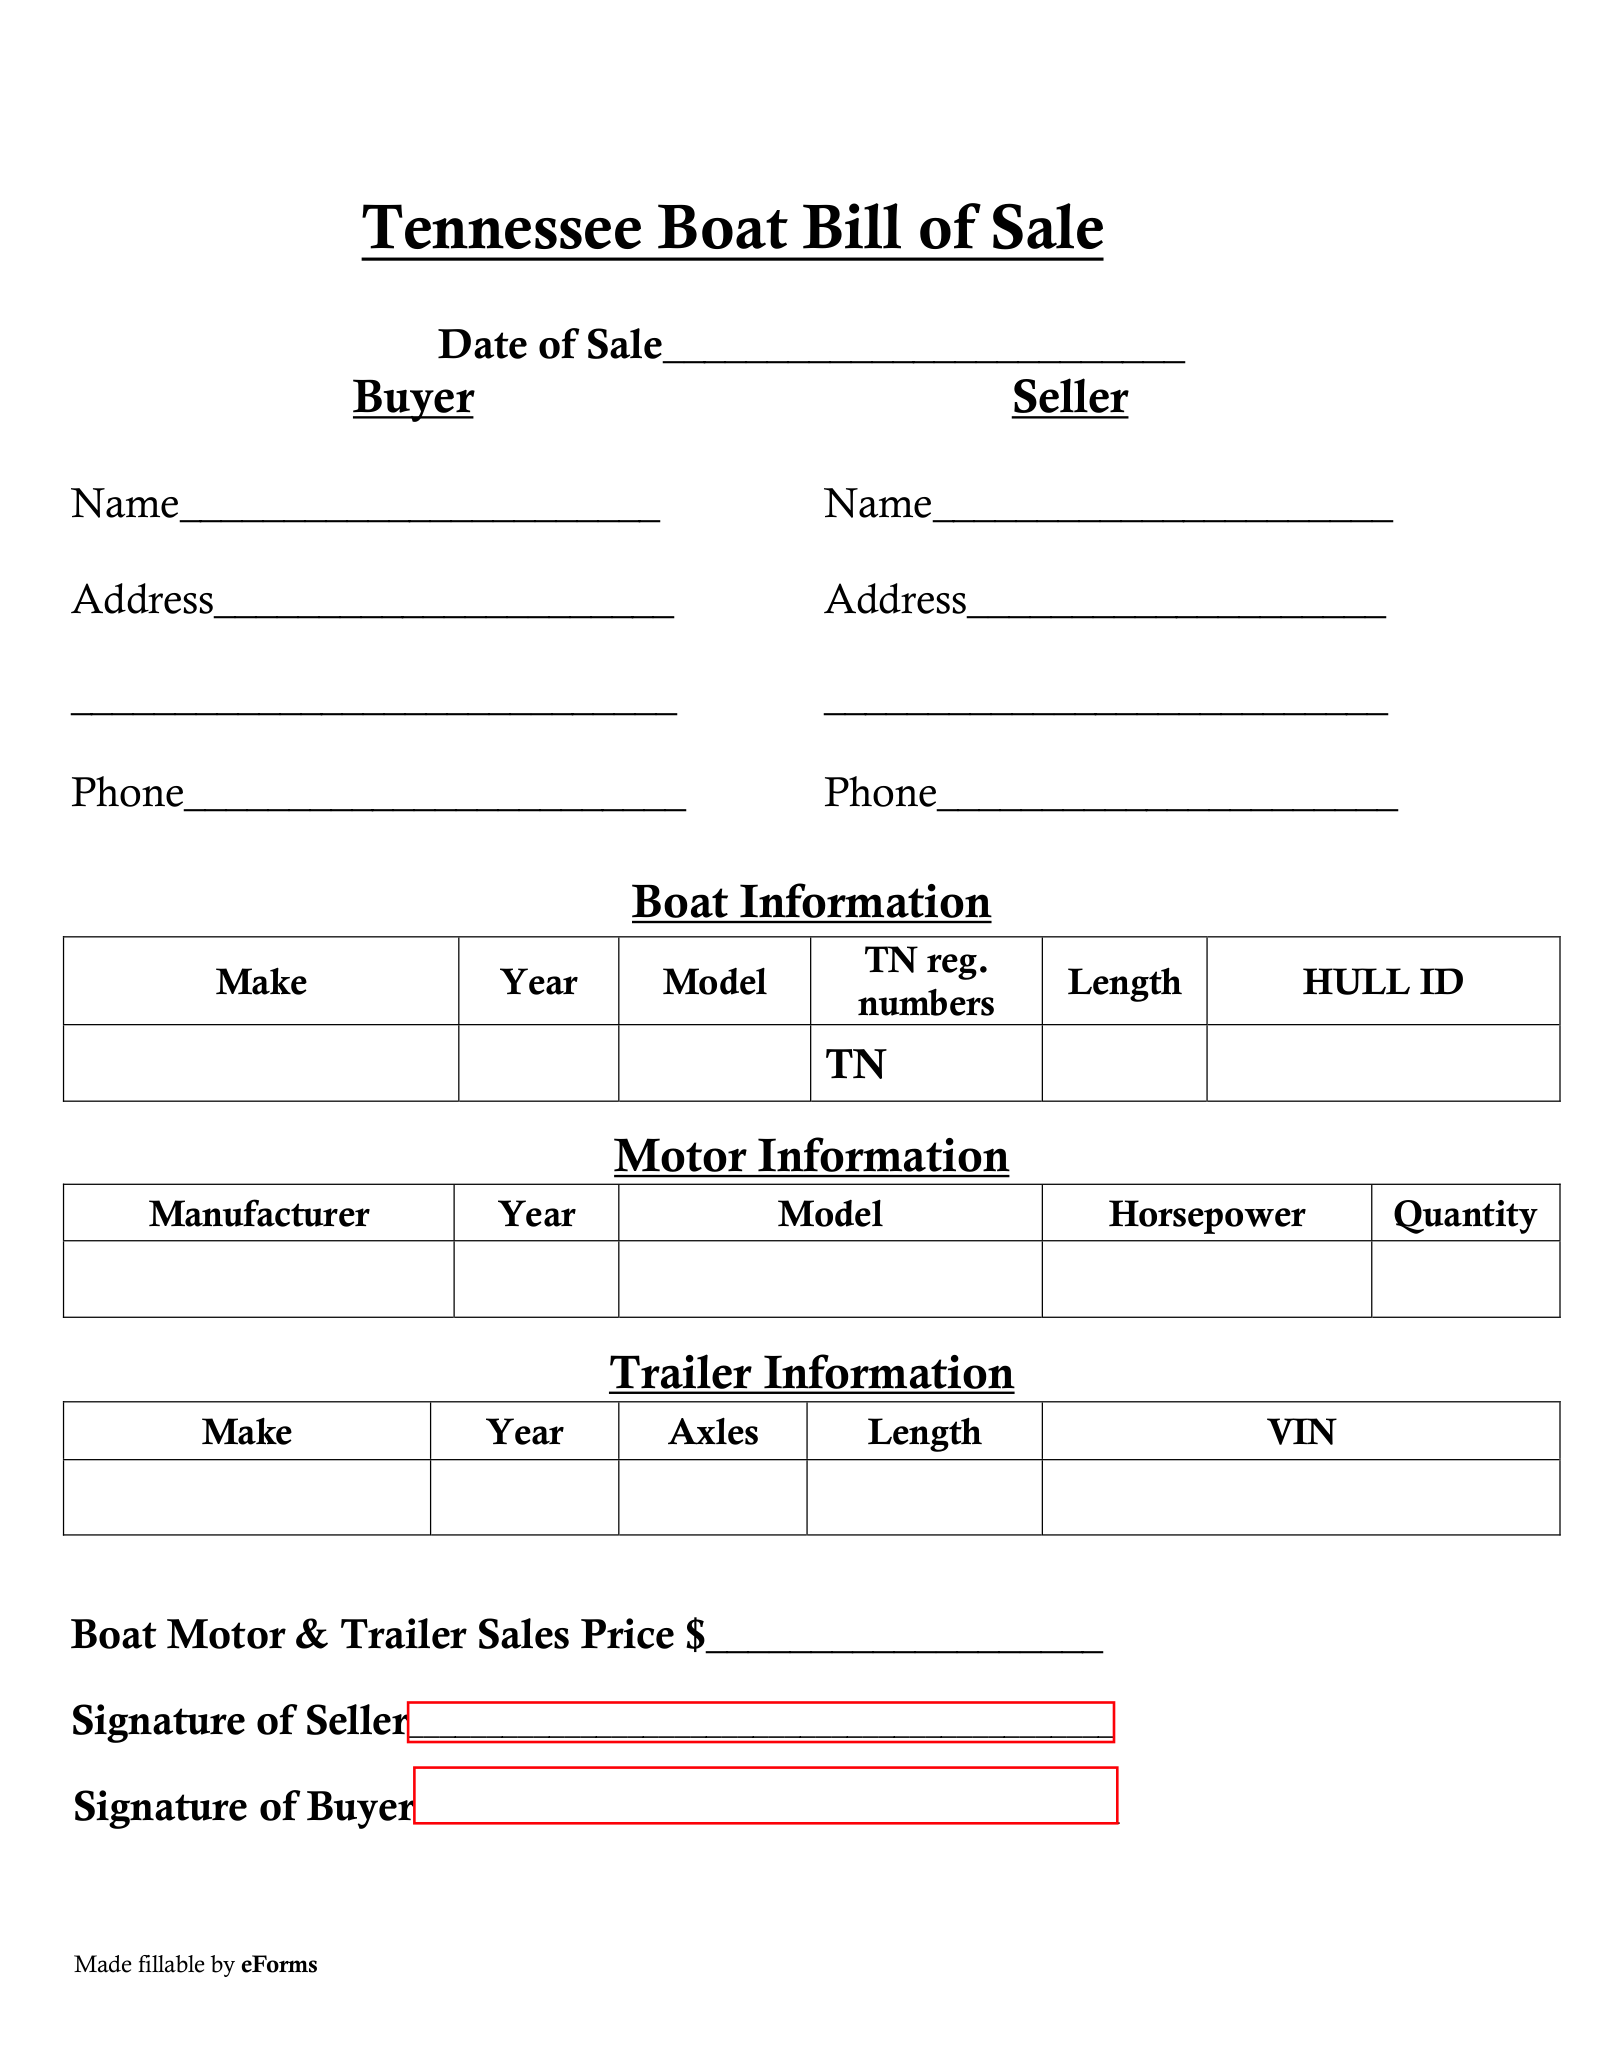 Free Tennessee Boat Bill of Sale Form - PDF – eForms